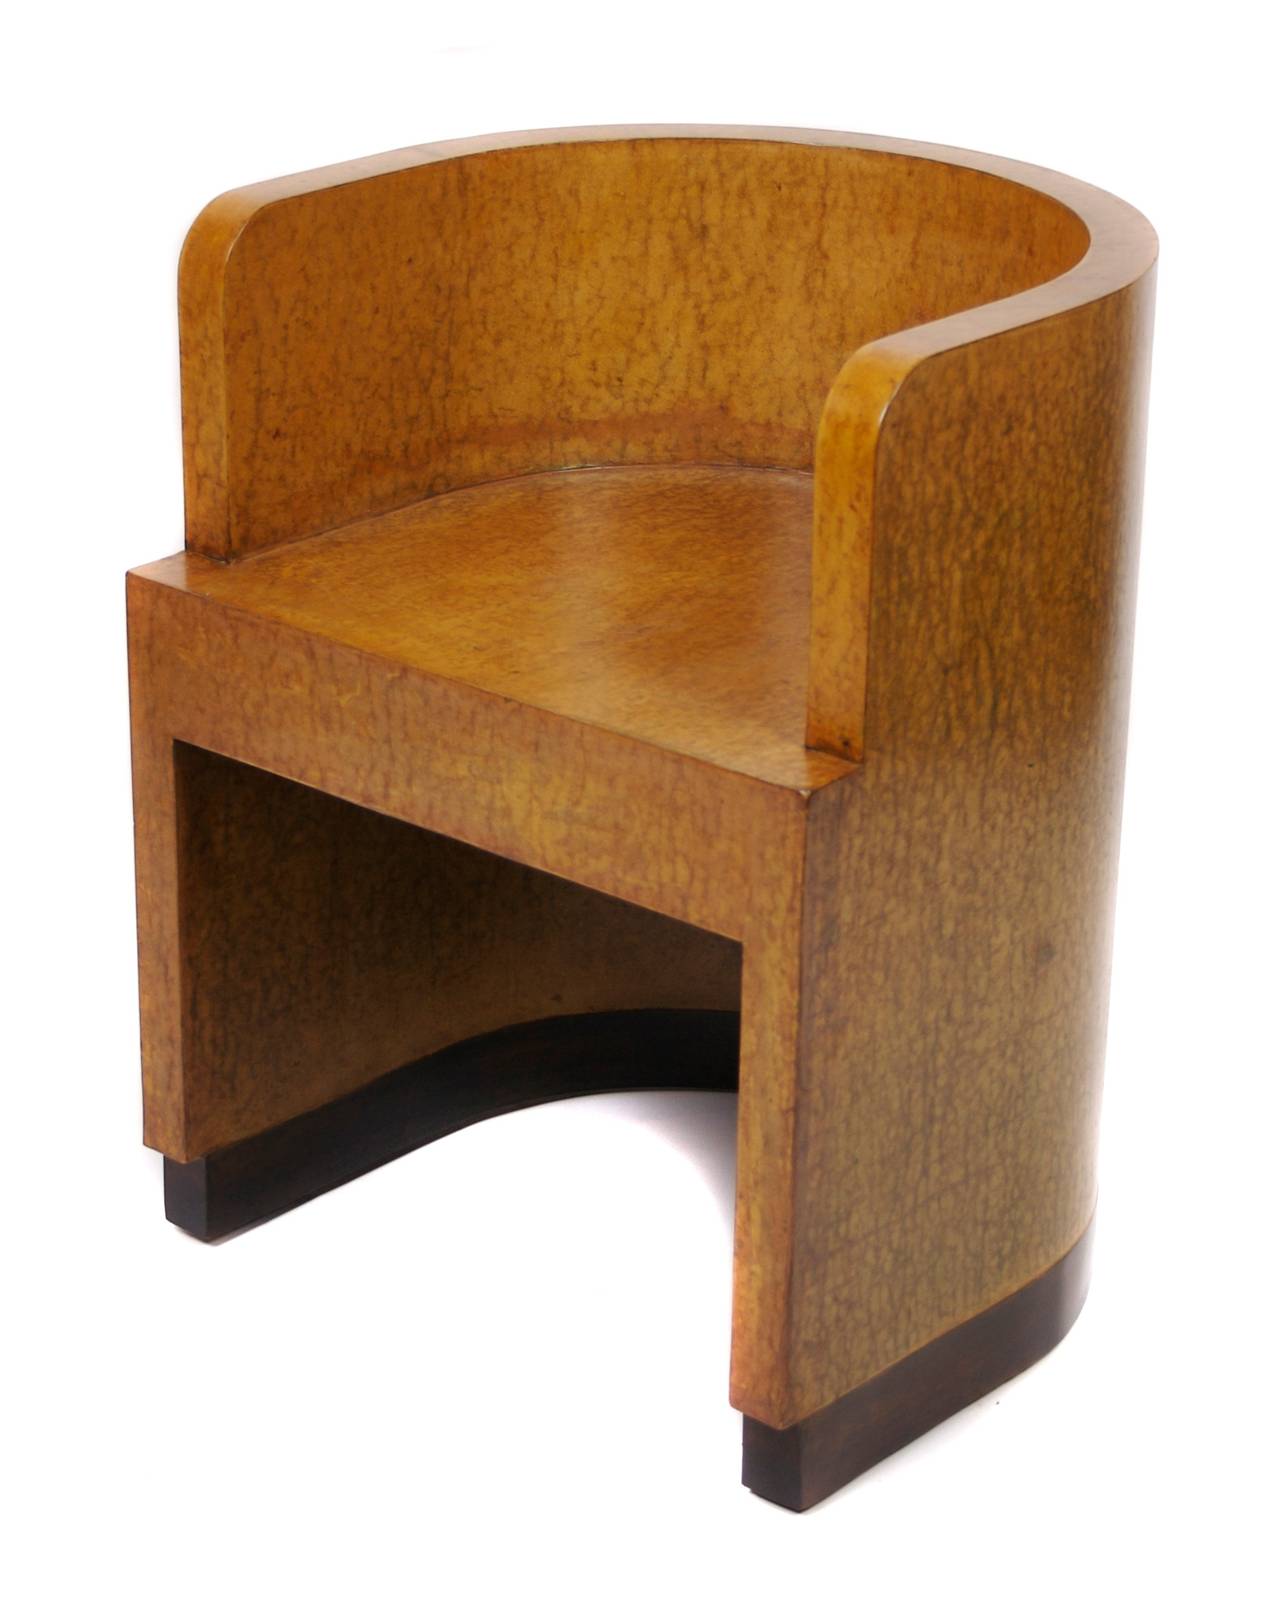 A striking pair of chairs by Giuseppe Pagano and Gino Levi Montalcini, 1929. Spruce structure covered with thin layer of plywood and a layer of boxwood veneer; these roll with wheels on ball metal casters. 

These, along with other pieces of